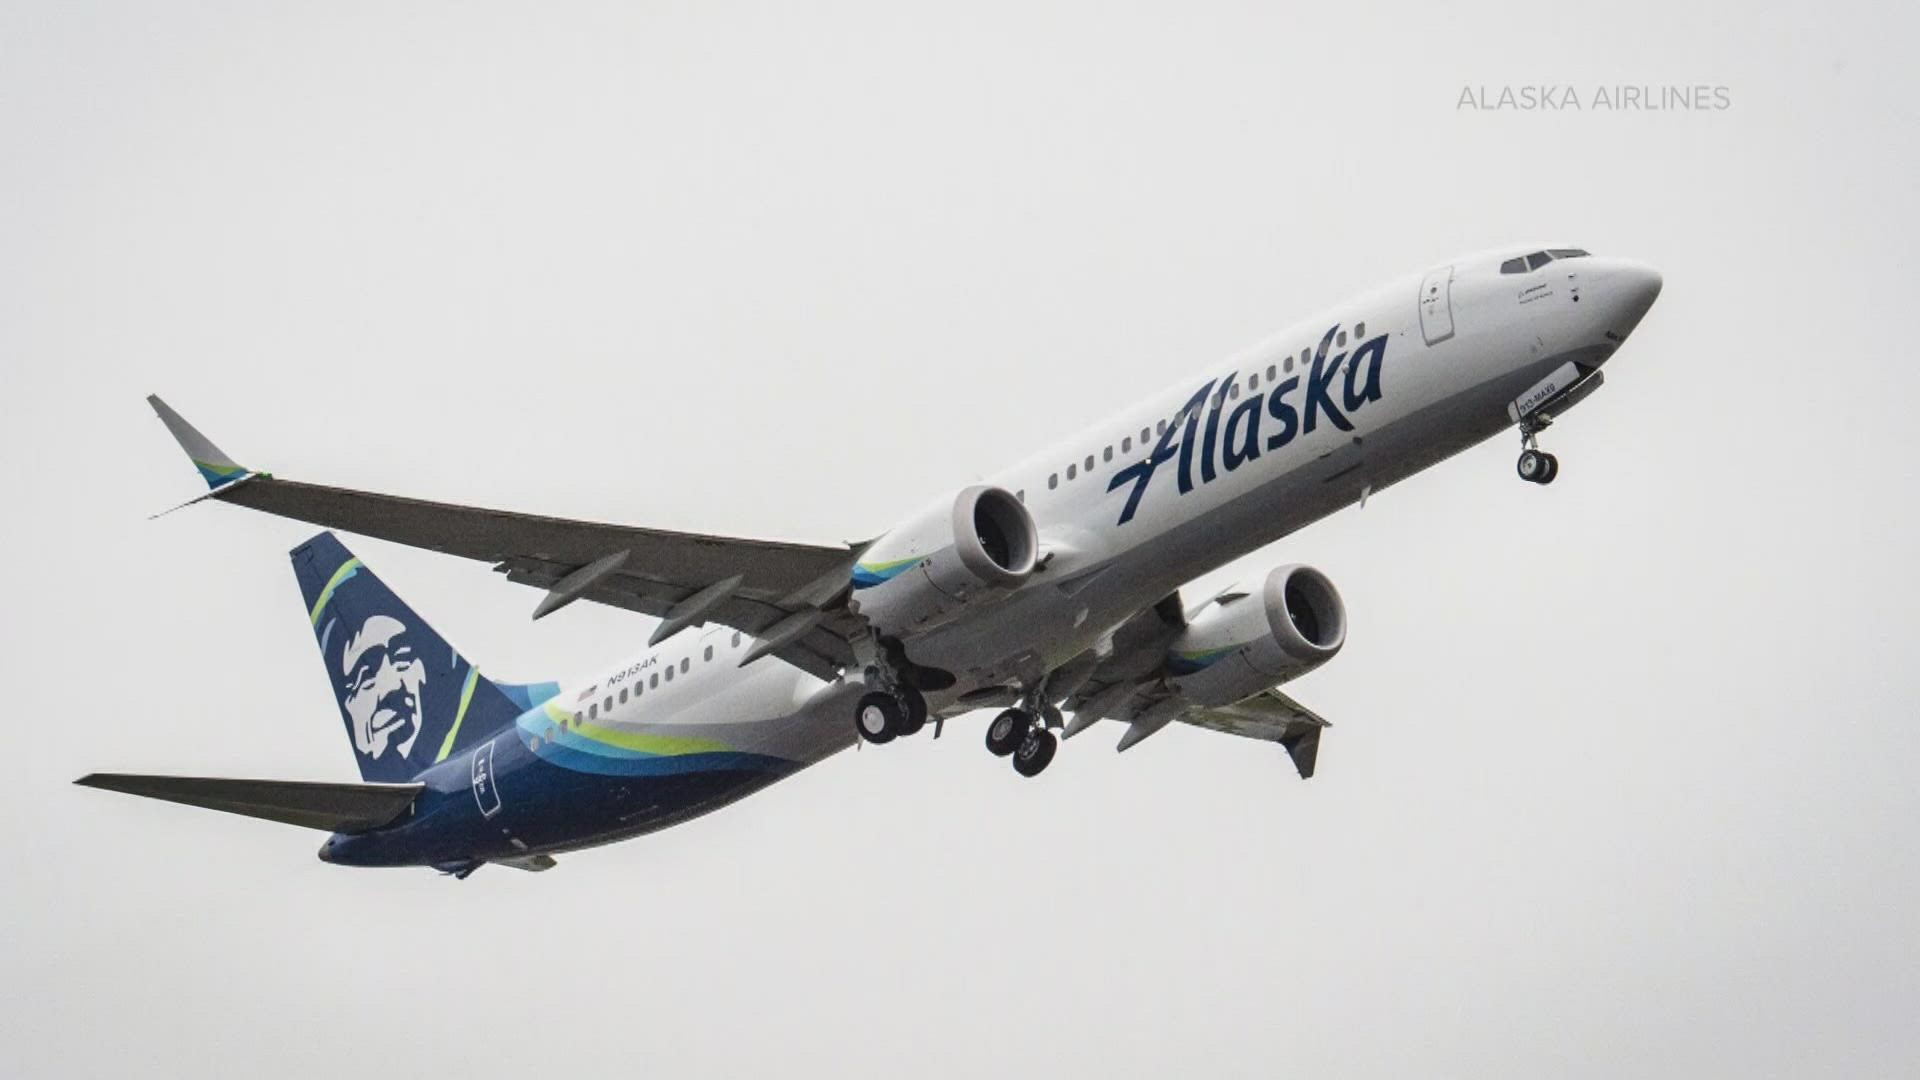 The company's first-quarter results were "significantly impacted" by the January door panel blowout, according to Alaska Airlines.